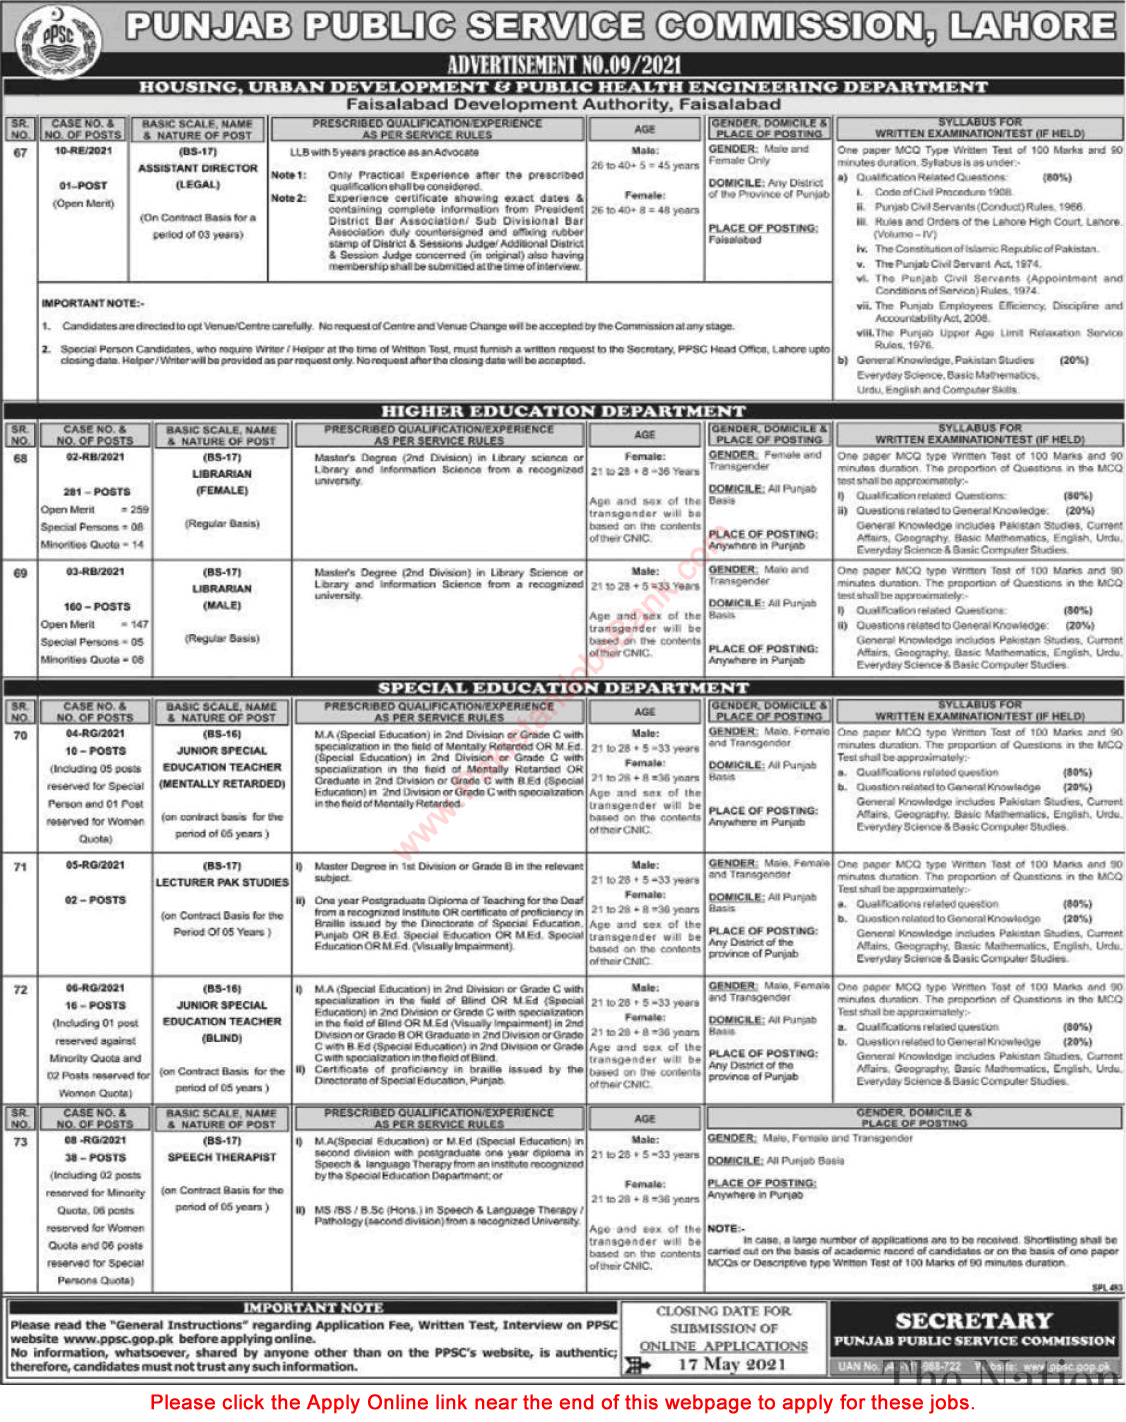 PPSC Jobs May 2021 Apply Online Consolidated Advertisement No 09/2021 Latest